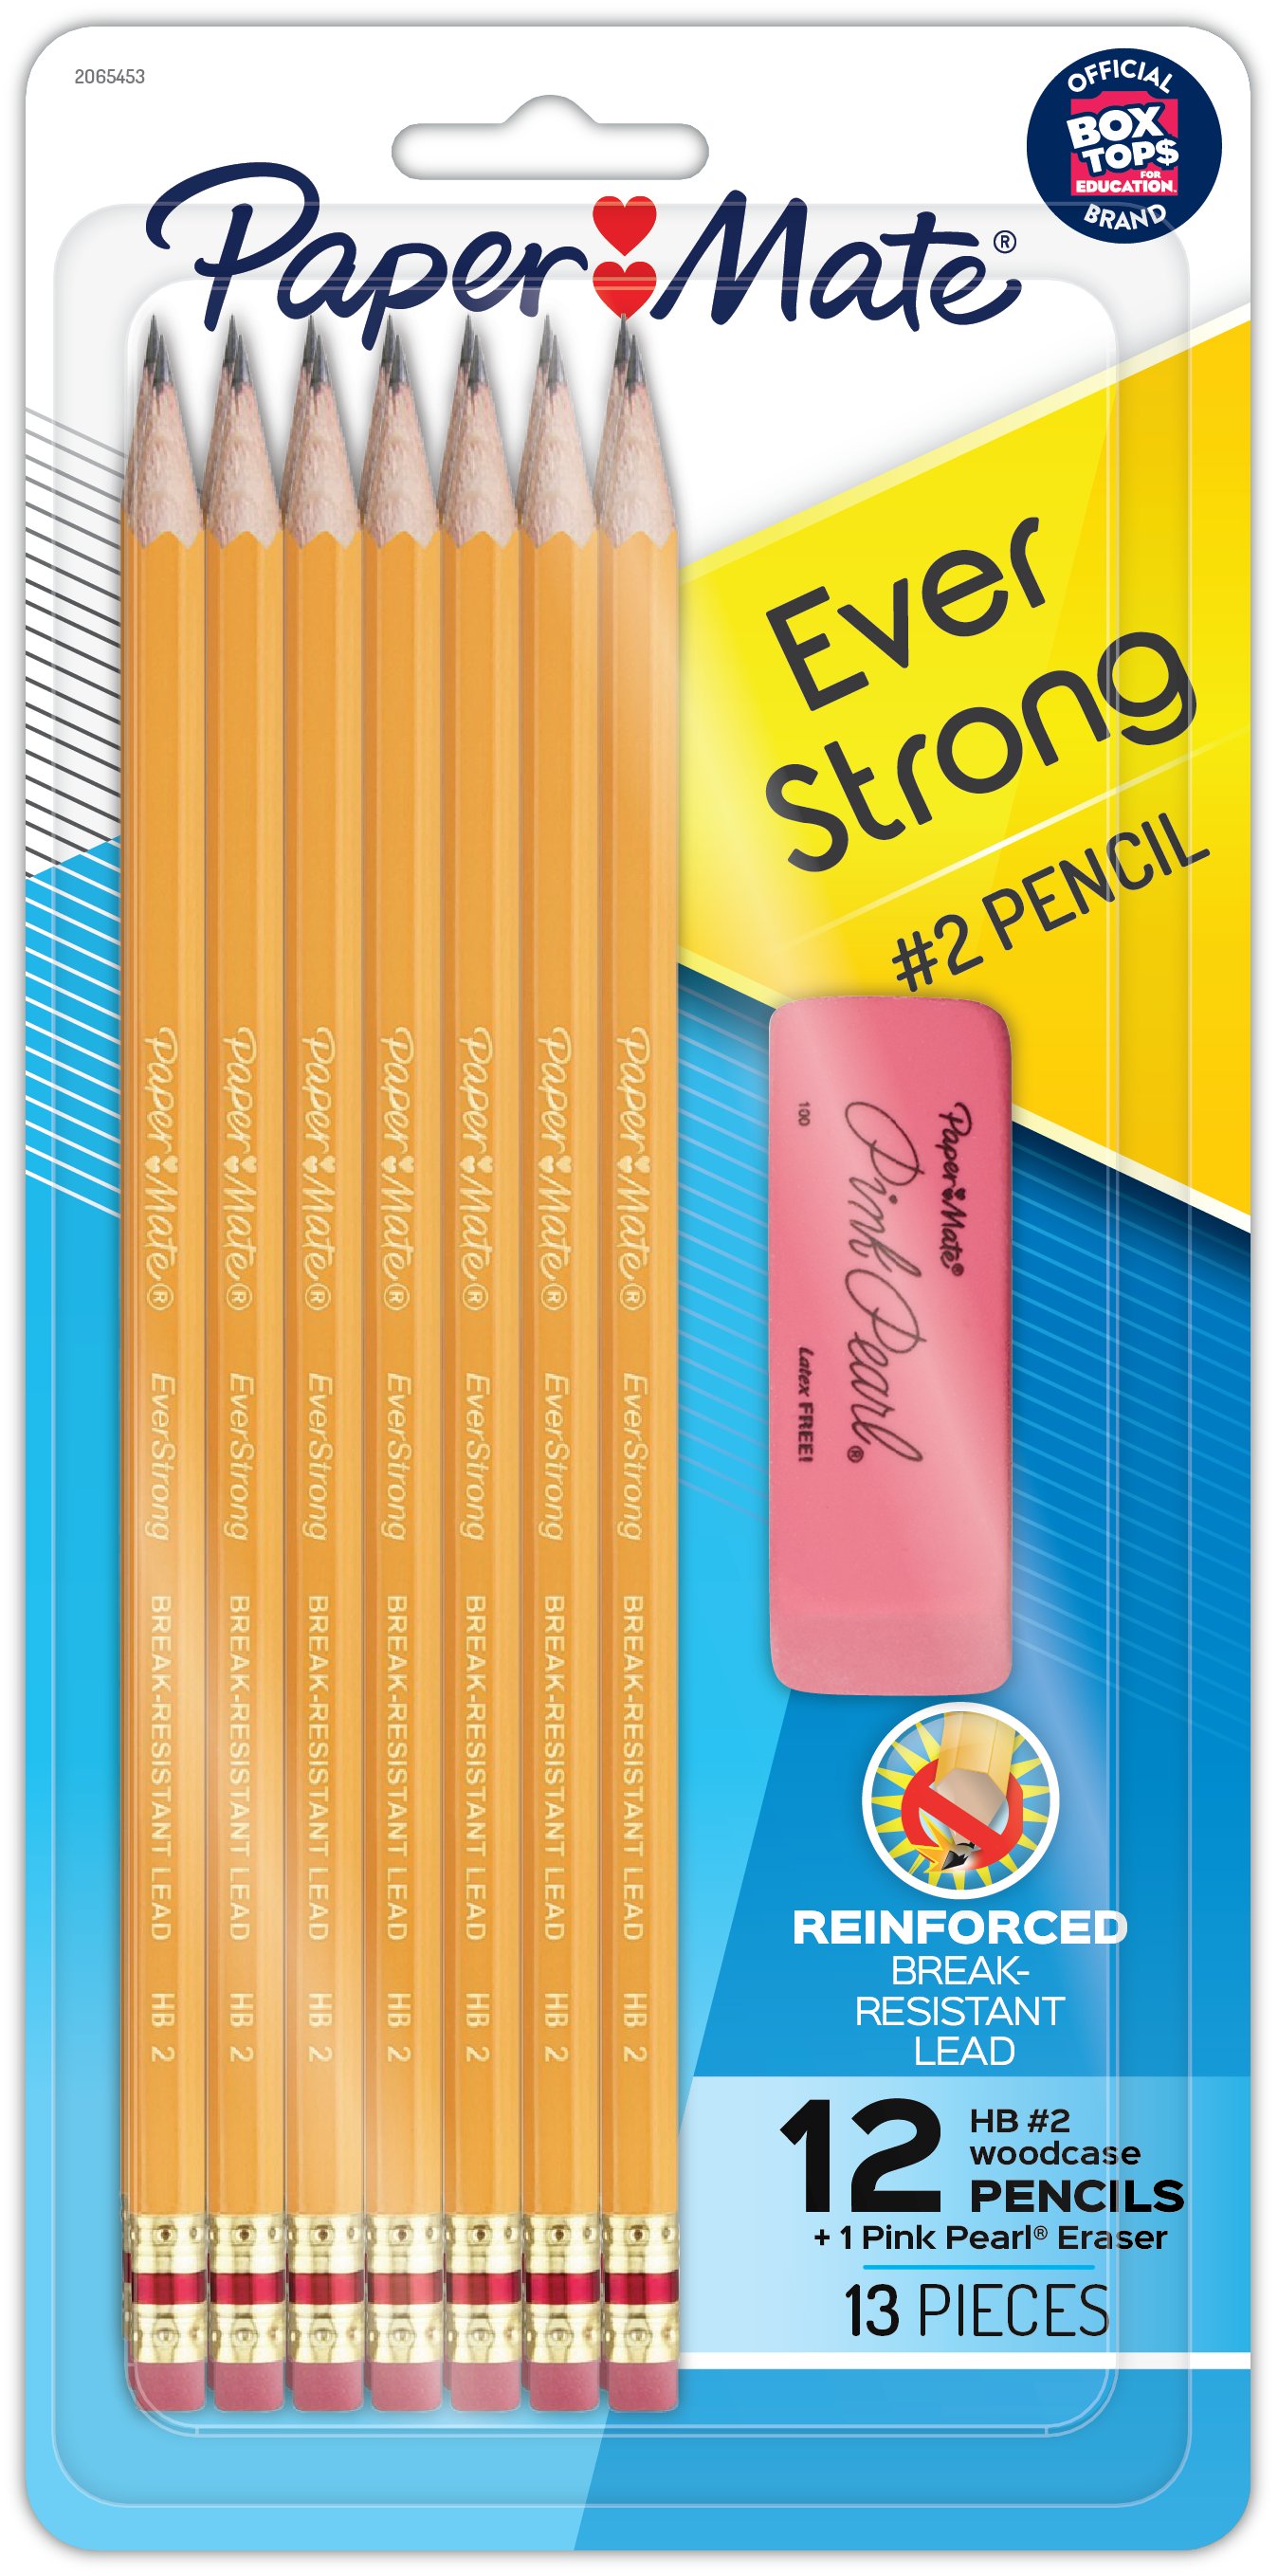 24-Pack Paper Mate EverStrong #2 Pencils Reinforced Break-Resistant Lead When Writing 1 